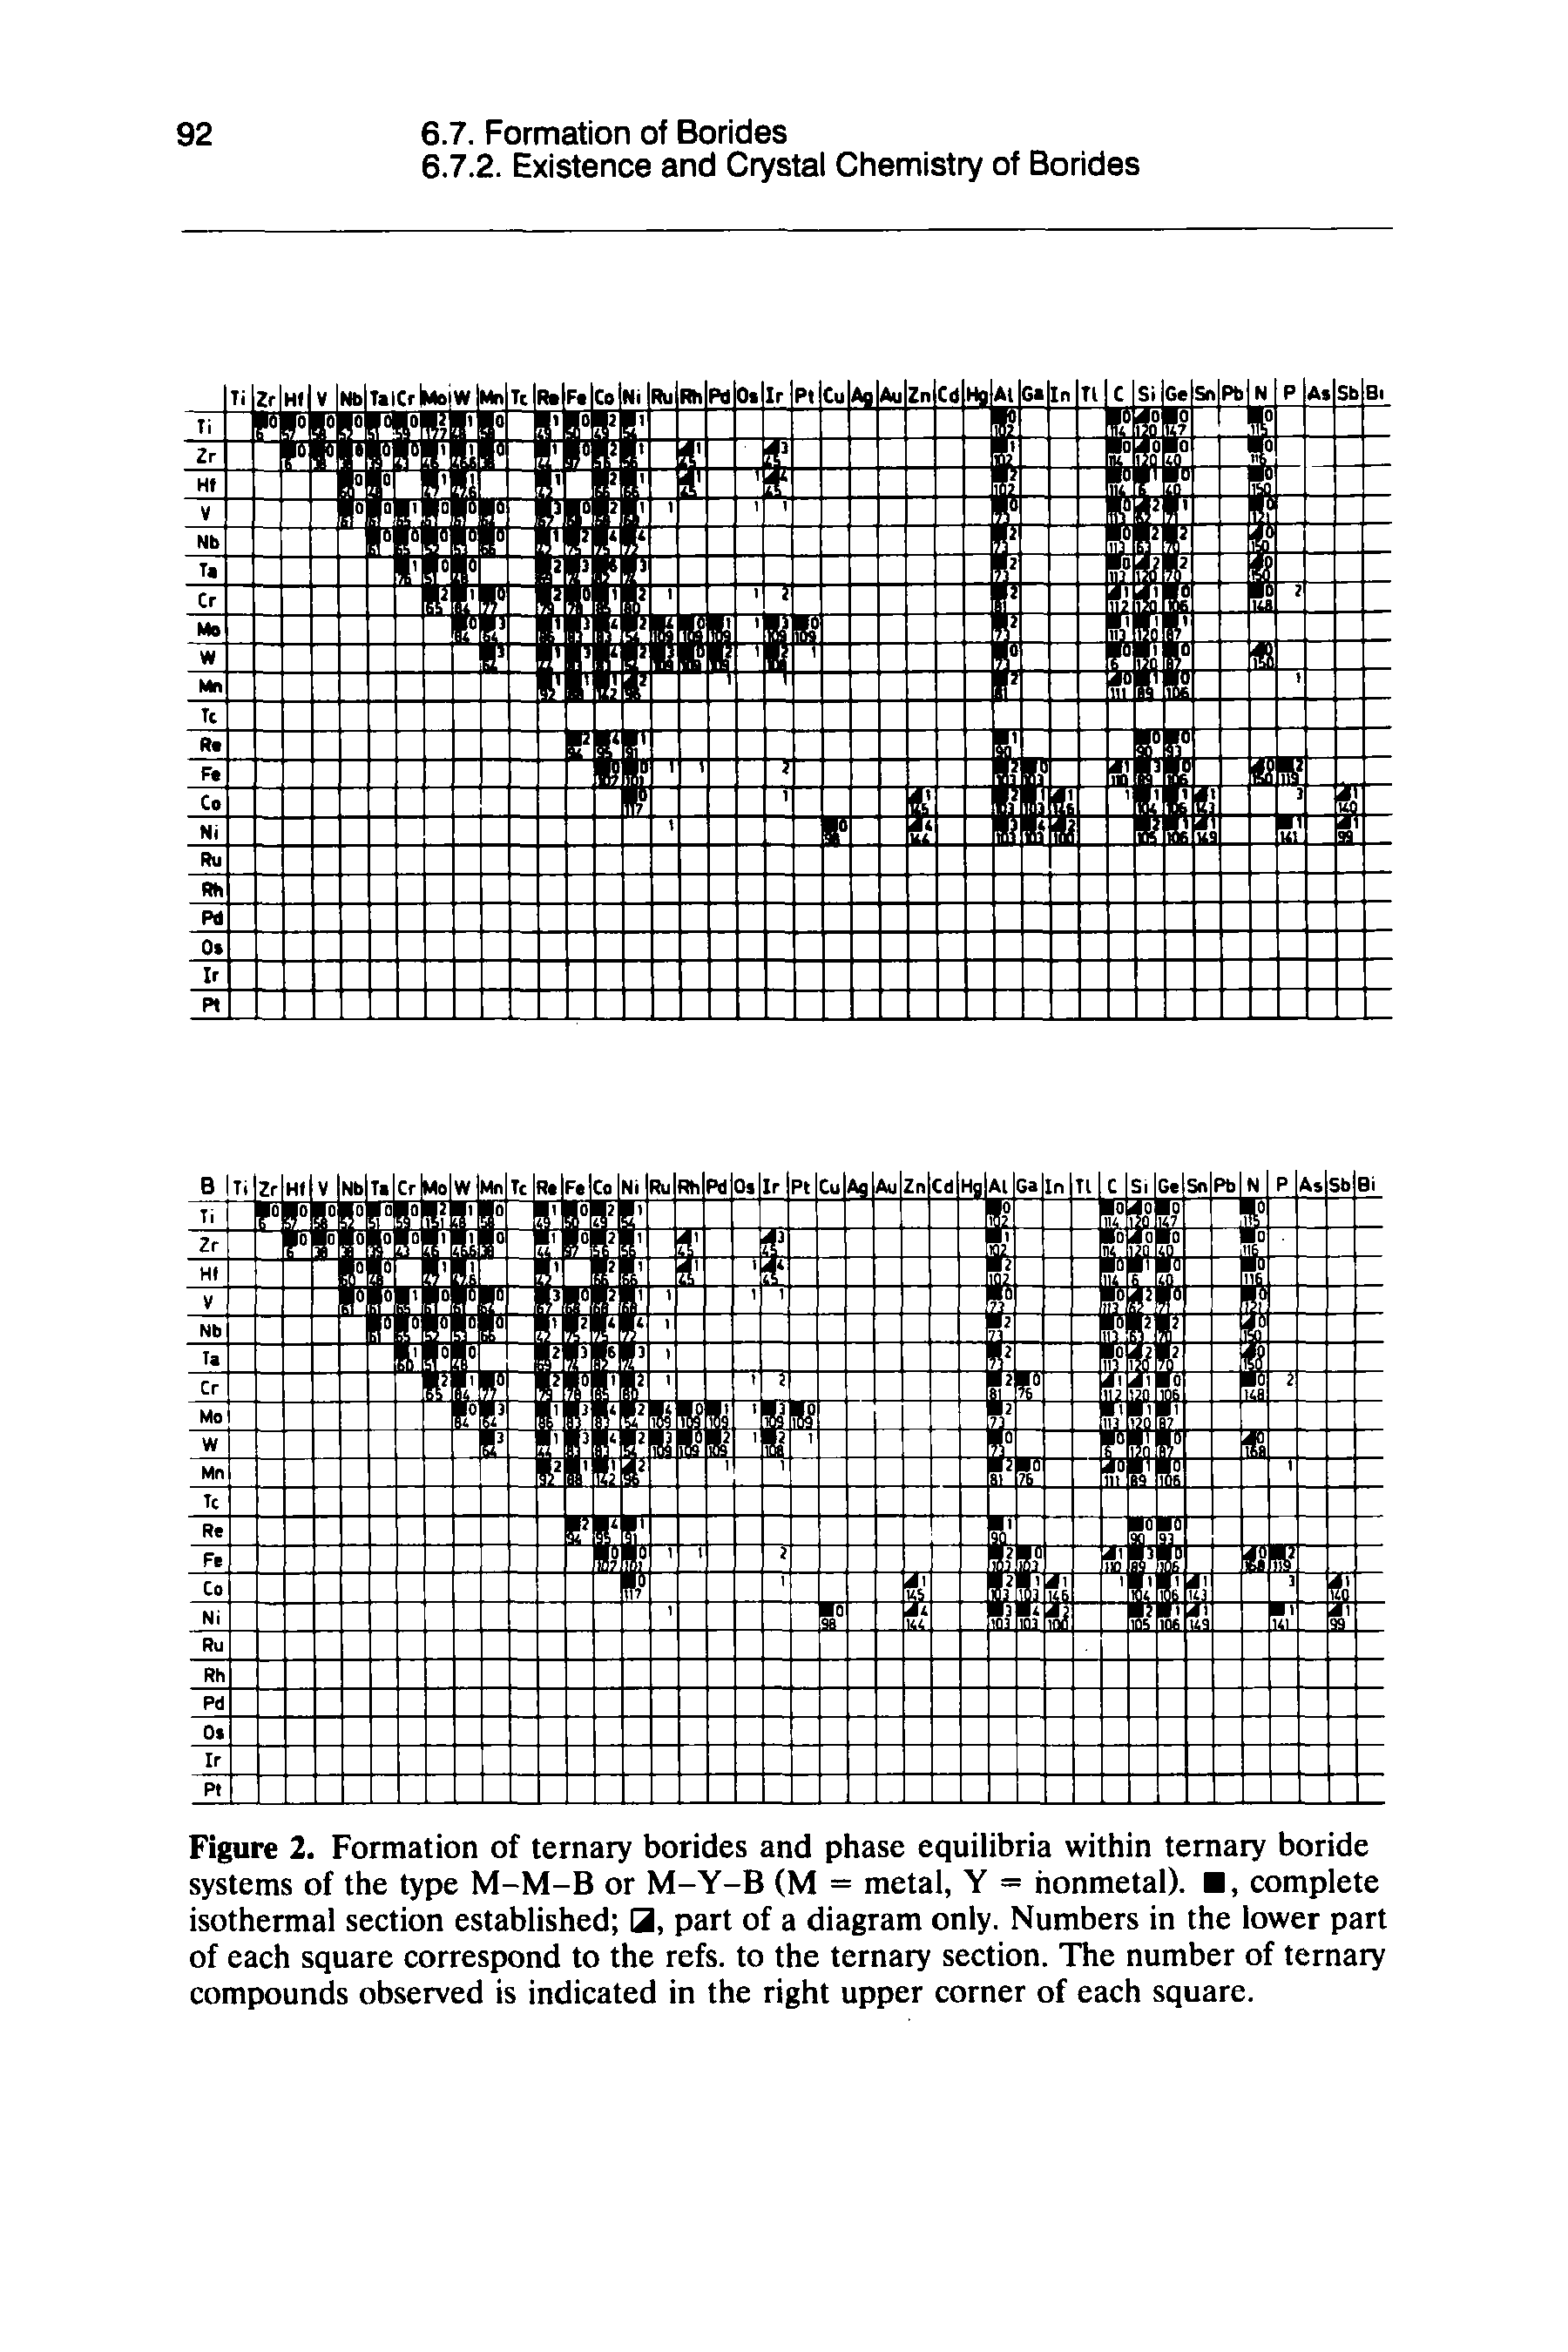 Figure 2. Formation of ternary borides and phase equilibria within ternary boride systems of the type M-M-B or M-Y-B (M = metal, Y = honmetal). , complete isothermal section established B, part of a diagram only. Numbers in the lower part of each square correspond to the refs, to the ternary section. The number of ternary compounds observed is indicated in the right upper corner of each square.